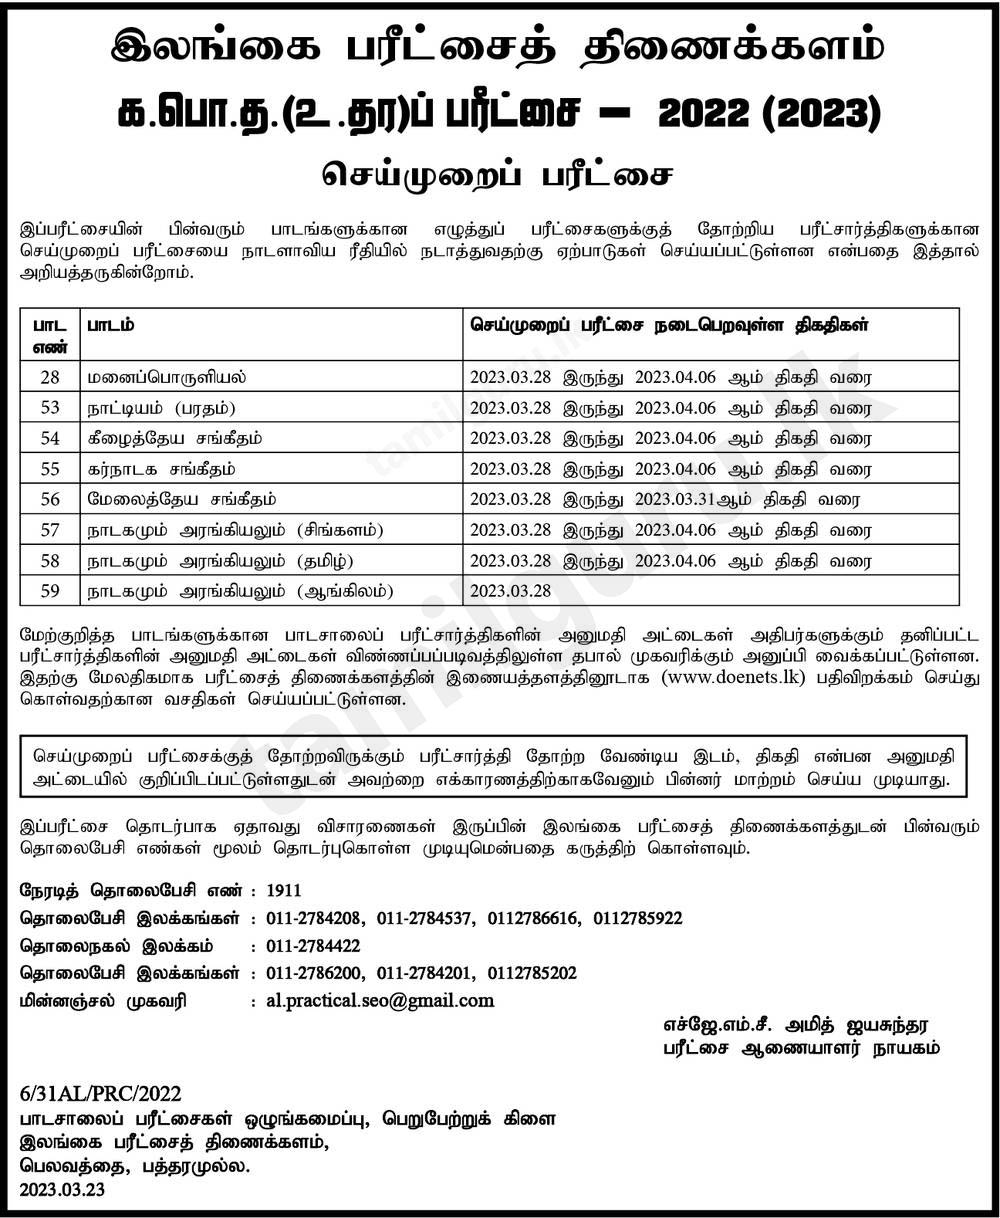 Practical Tests of the G.C.E. A/L Examination 2022 (2023) - Admission Card & Notice